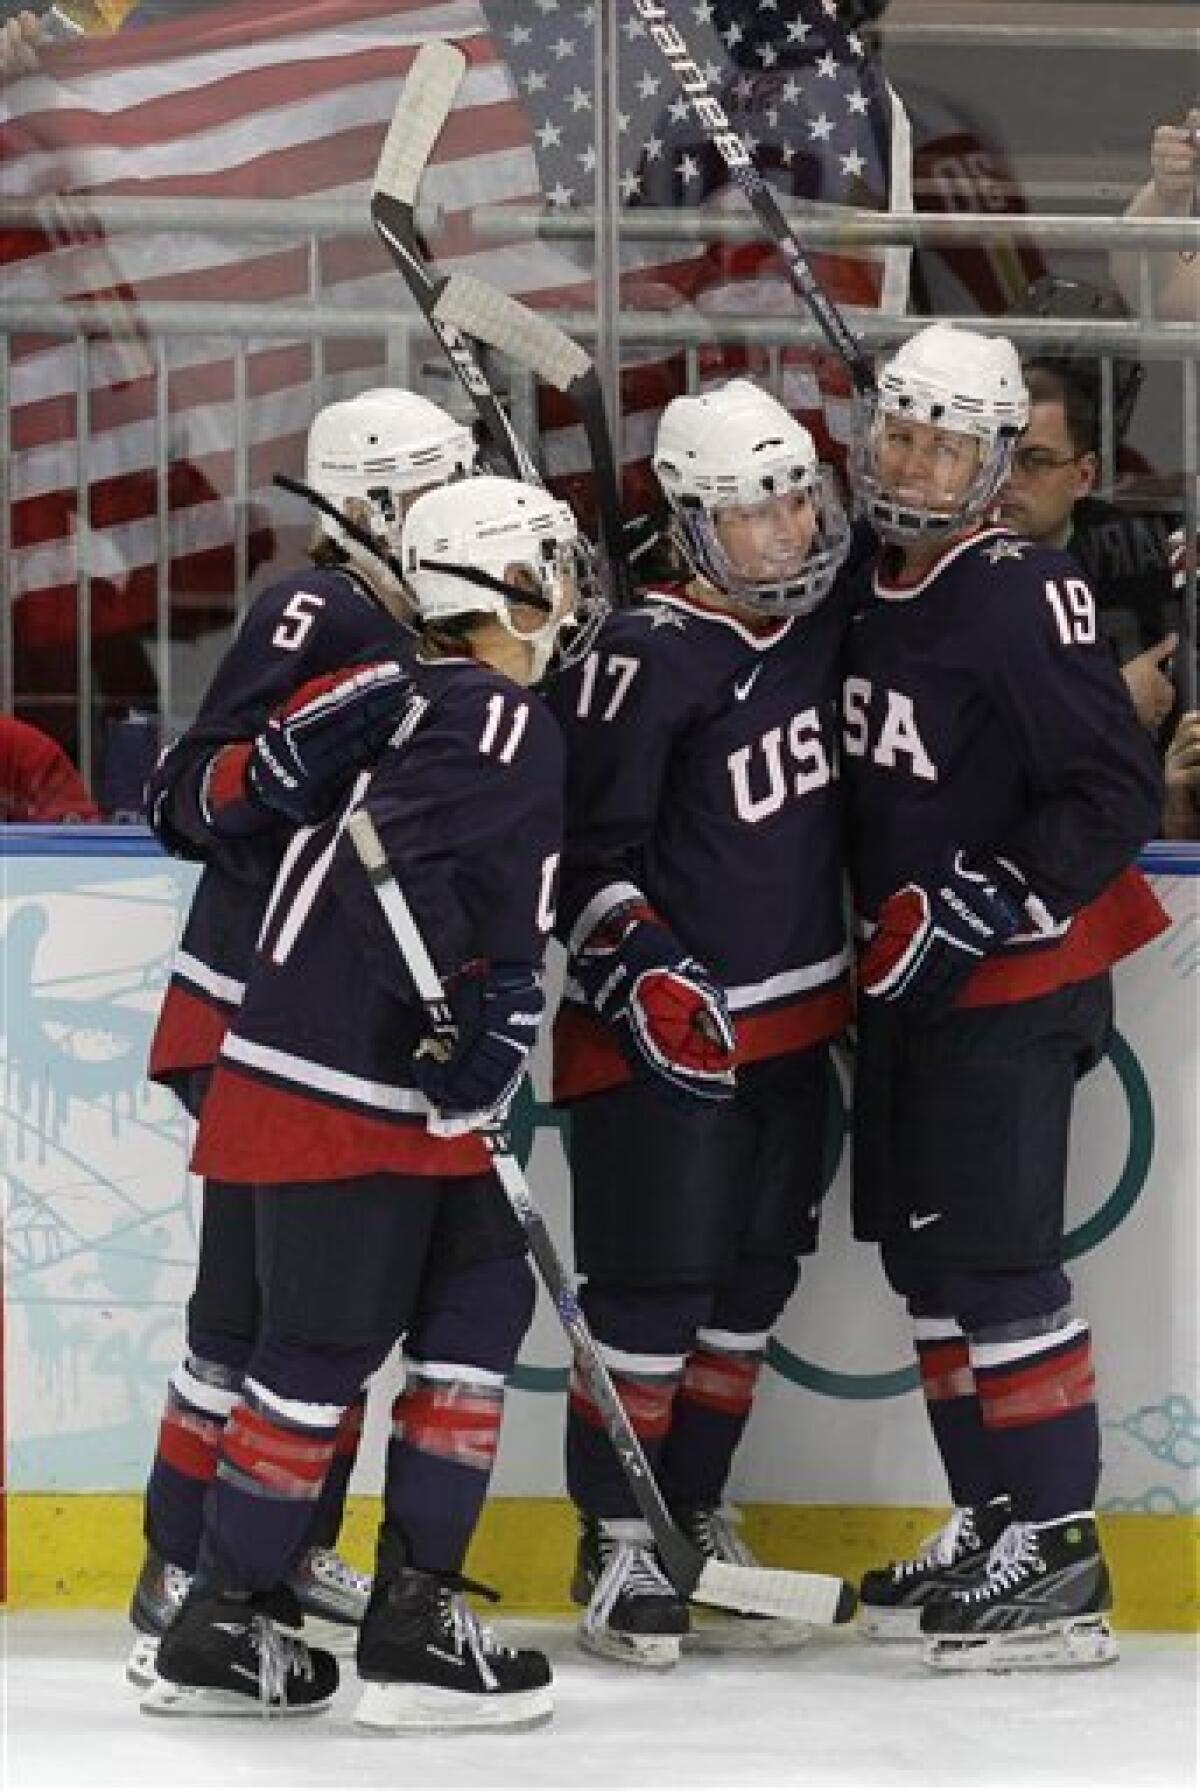 USA's forward Jocelyne Lamoureux (17) celebrates with teammates Karen Thatcher (5), Lisa Chesson (11), and Gigi Marvin (19) after scoring the USA's eighth goal against China in women's preliminary round hockey play at the Vancouver 2010 Olympics in Vancouver, British Columbia, Sunday, Feb. 14, 2010. (AP Photo/Chris O'Meara)